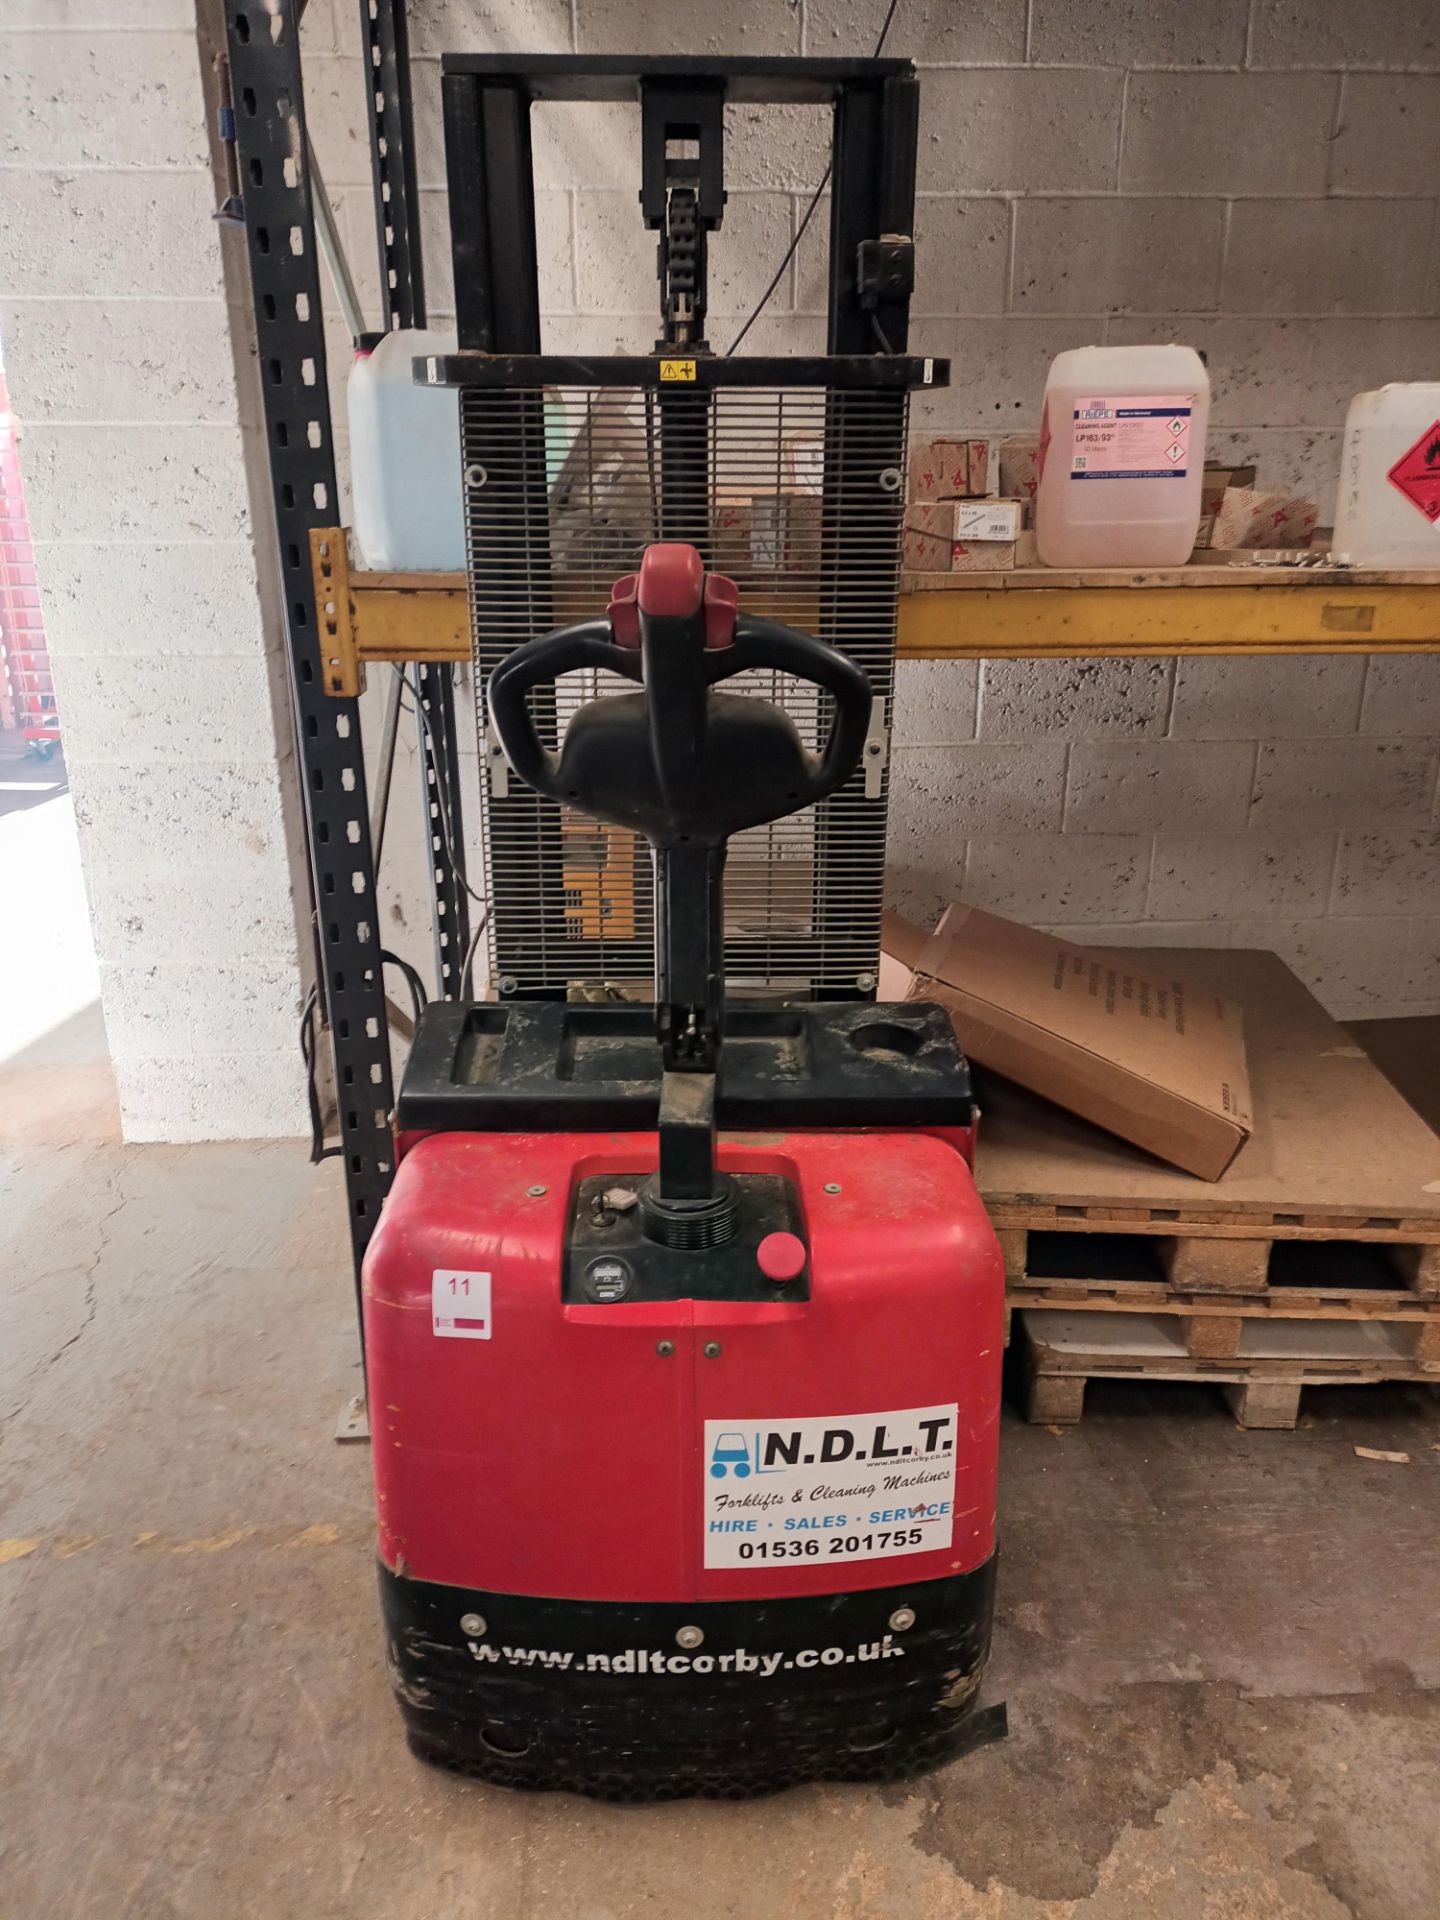 Record Warrior CS1529 pallet lifter (2012) with 3224 hours